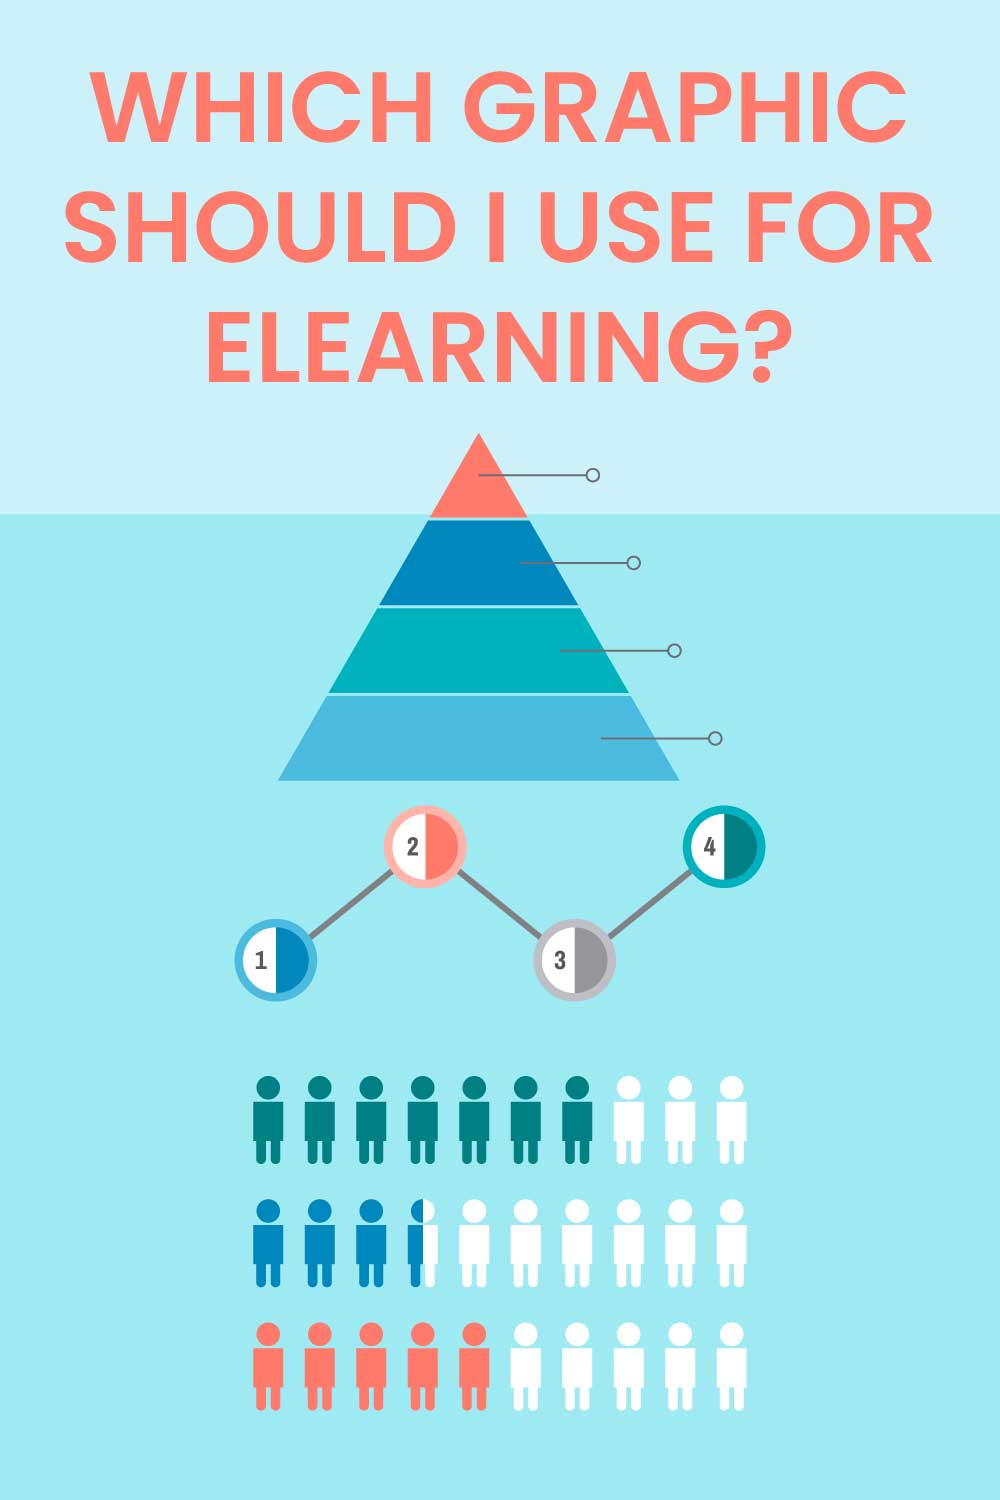 Which graphic should I use for eLearning?